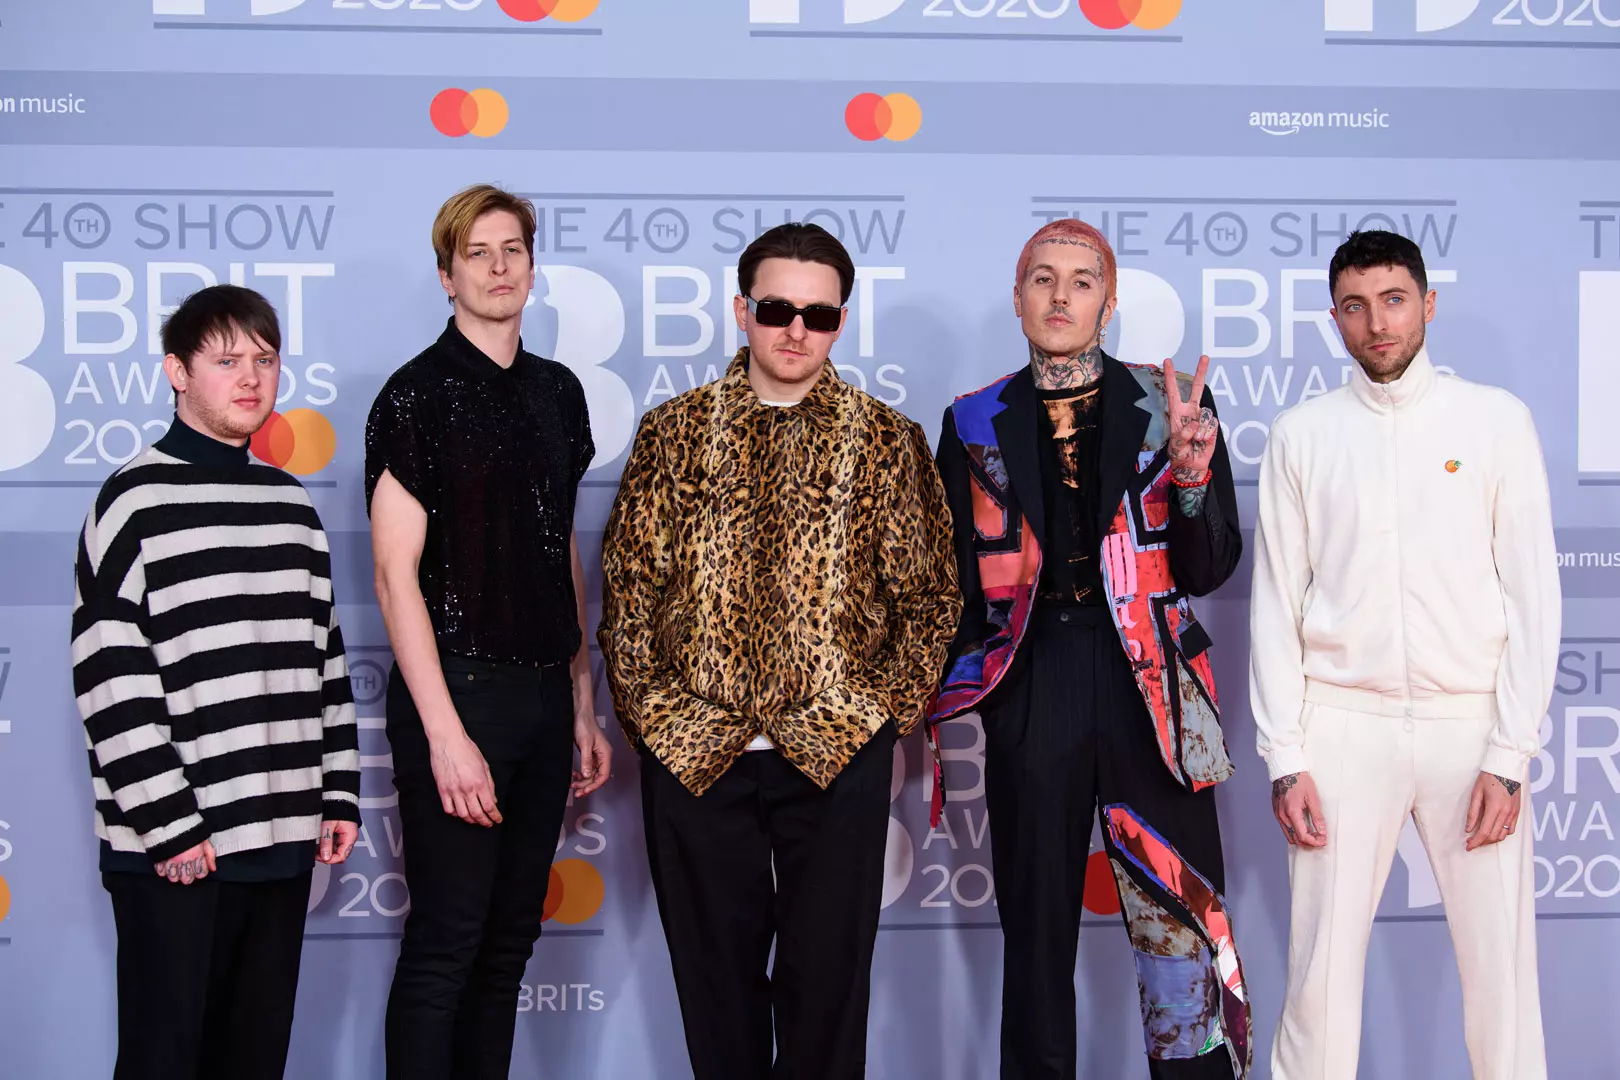 Bring Me the Horizon Dress as Spice Girls at Awards Show